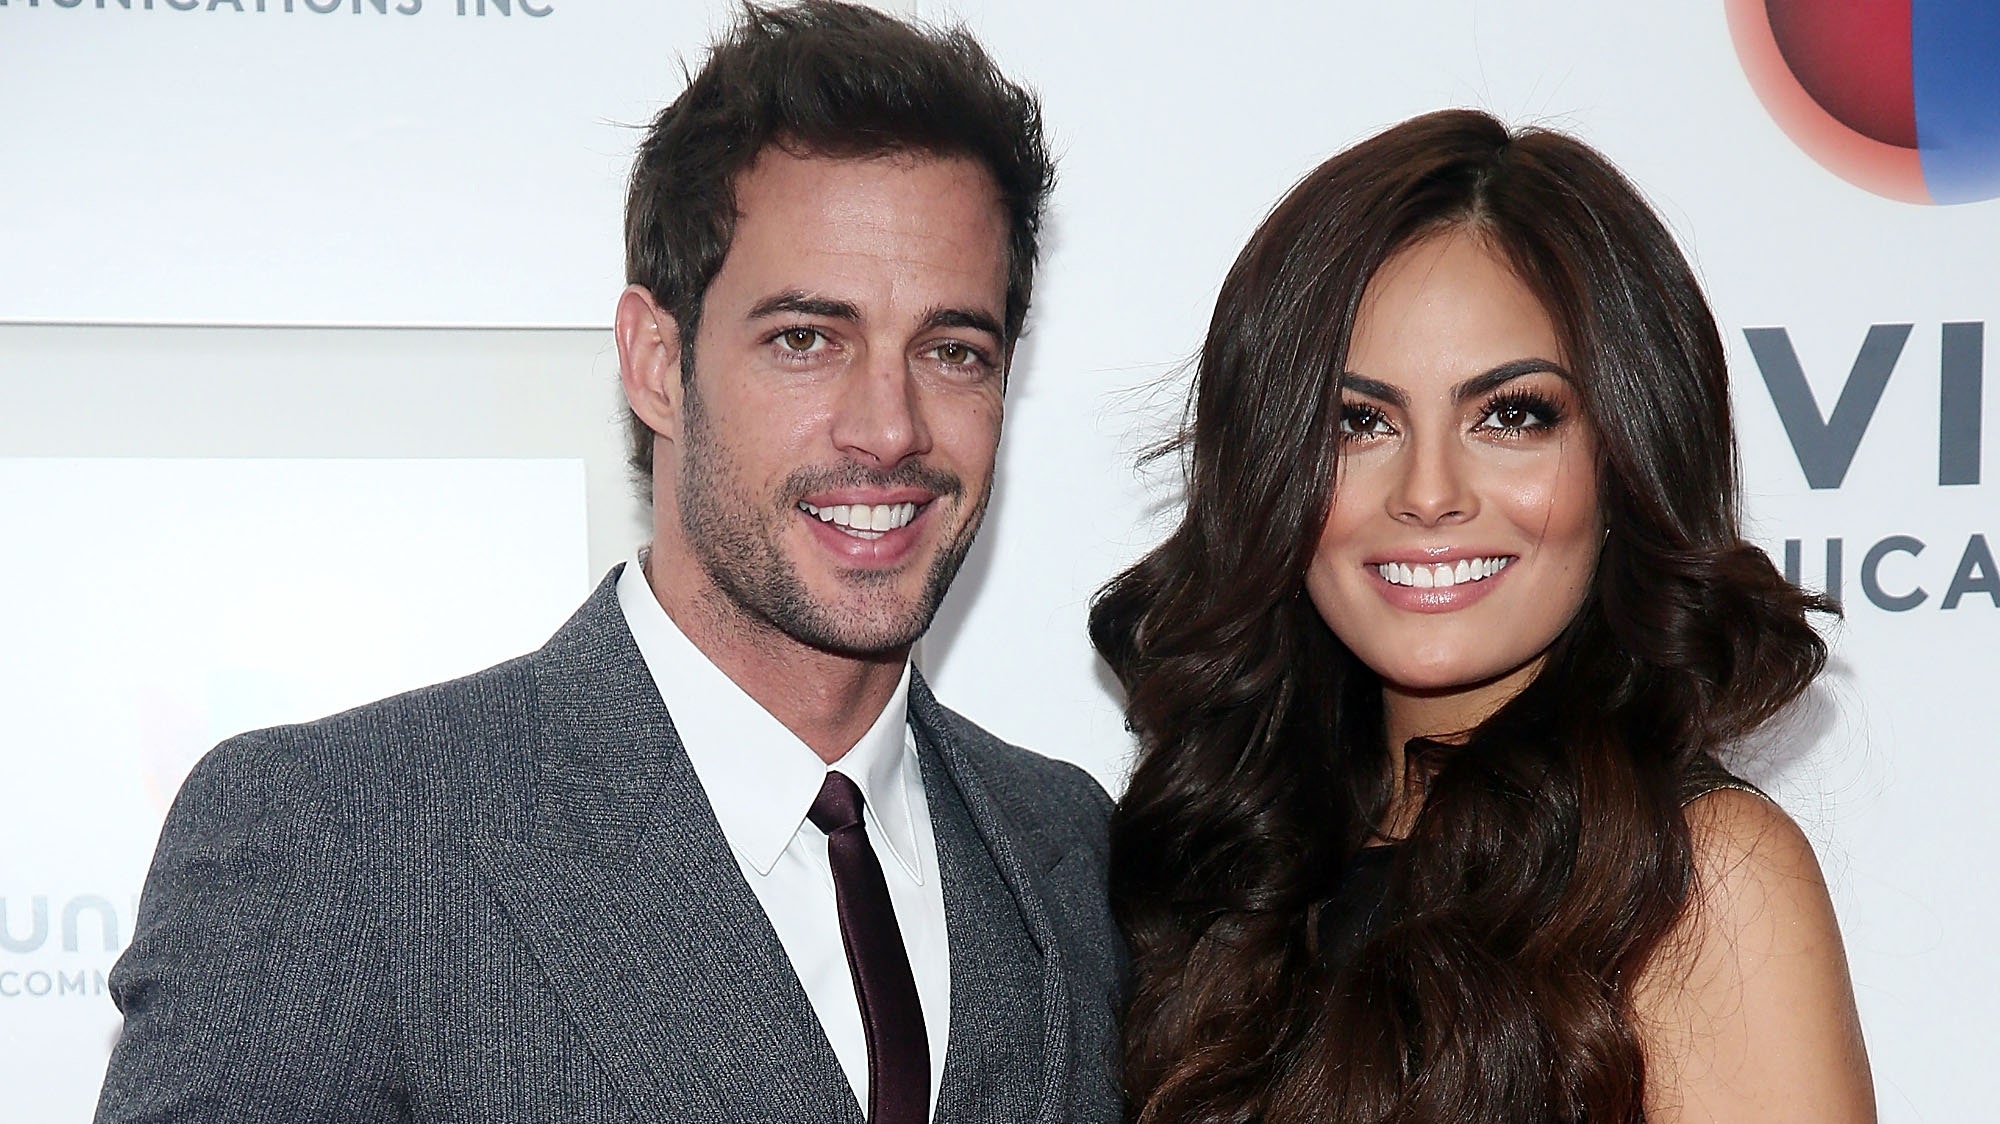 Rumors That William Levy Is Leaving Fiancé For Co-Star Navarrete | Fox News